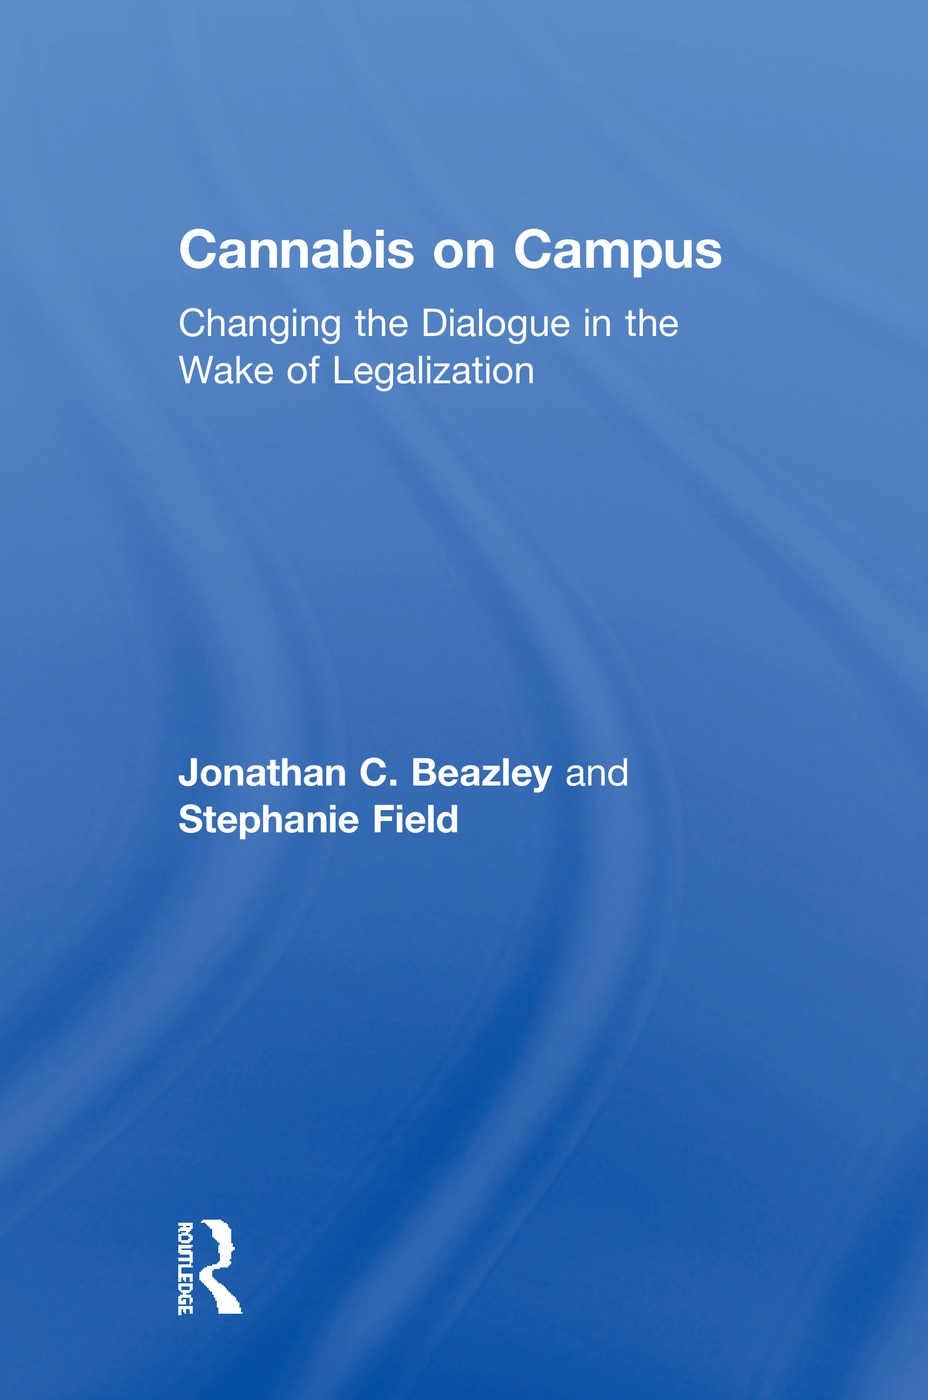 Cannabis on Campus: Changing the Dialogue in the Wake of Legalization